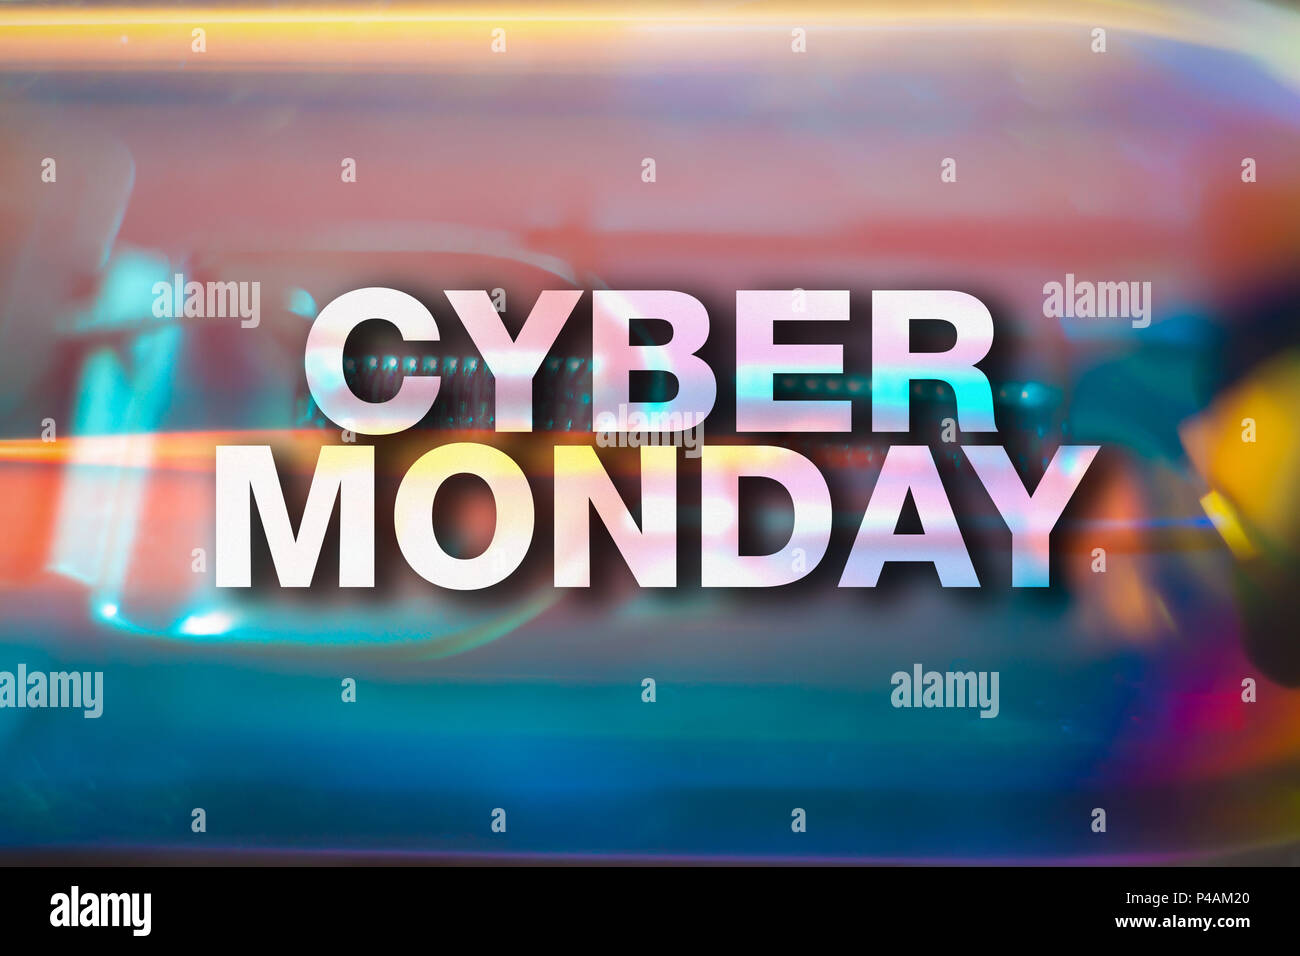 Cyber monday poster. Abstract background. Sale concept Stock Photo